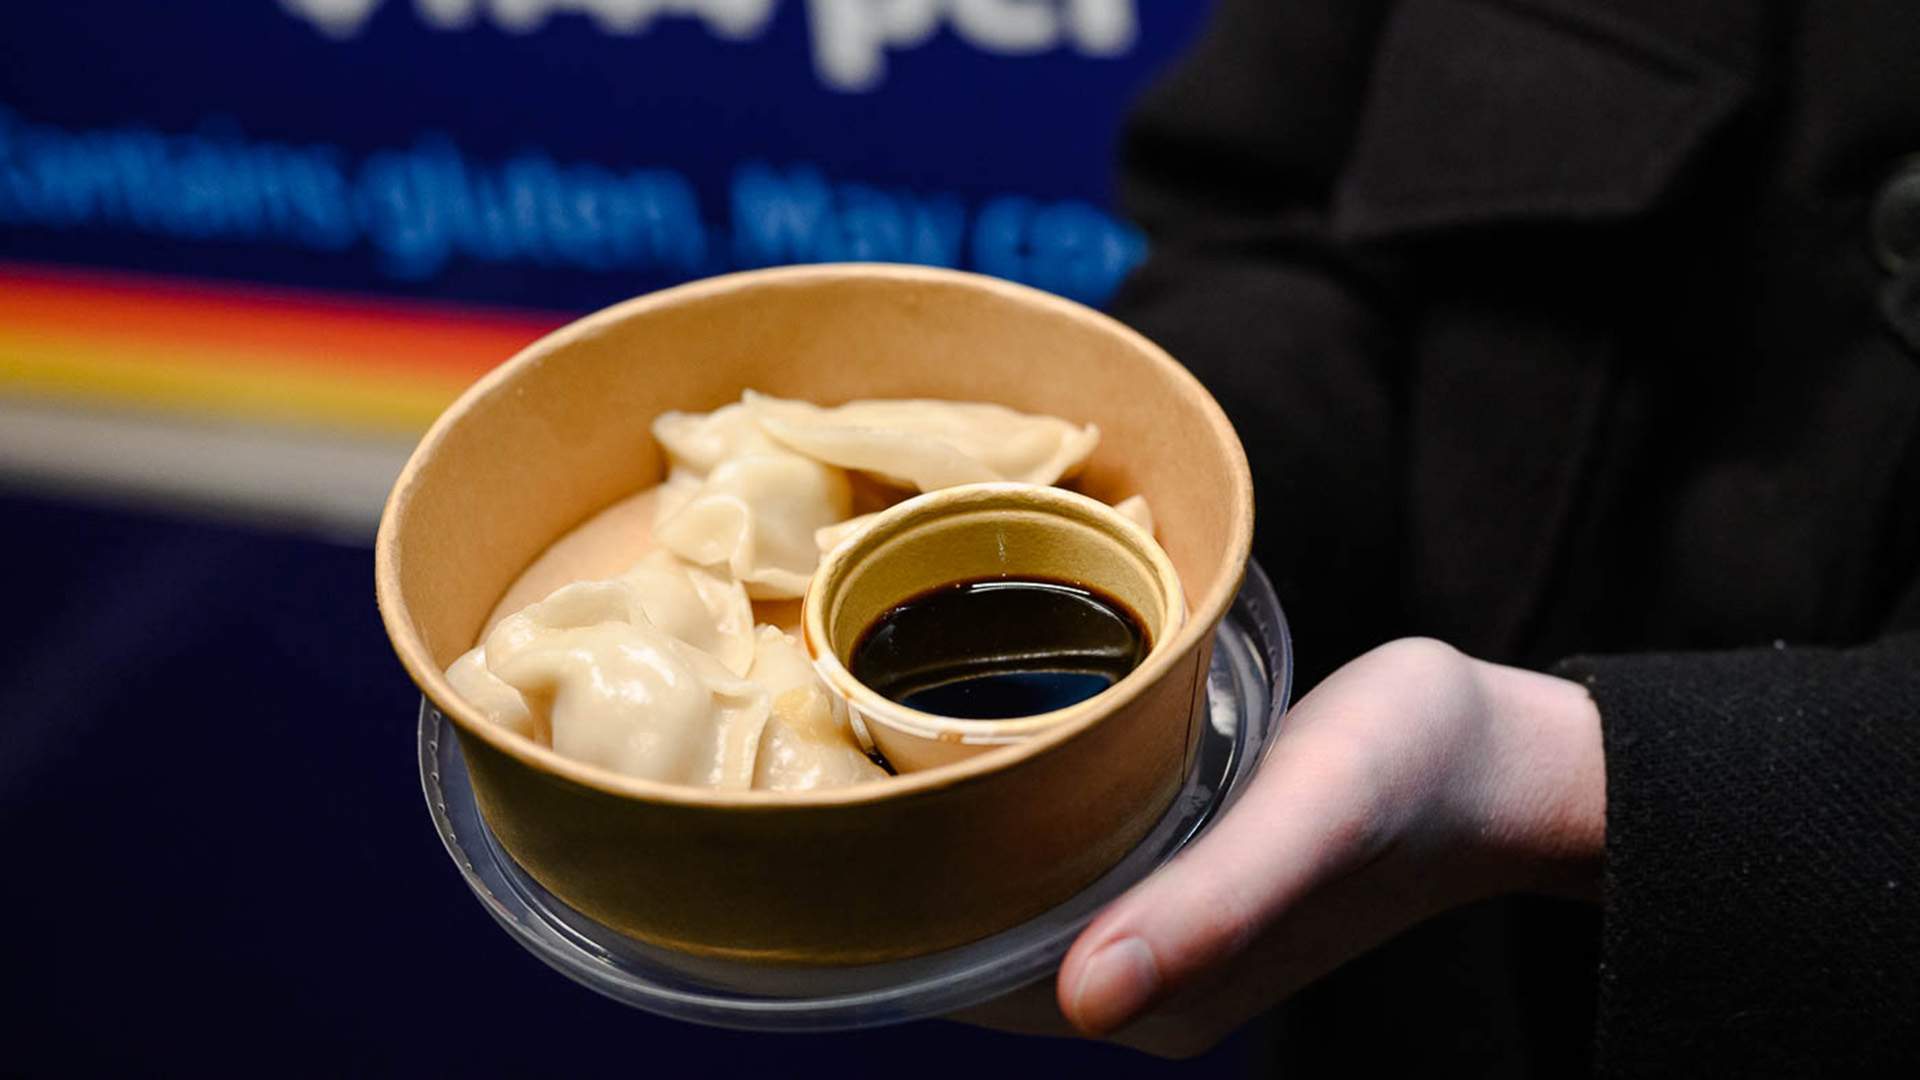 ALDI Is Opening a Pop-Up Dumpling Truck for One Night Only with Serves of Gyoza for $1.44